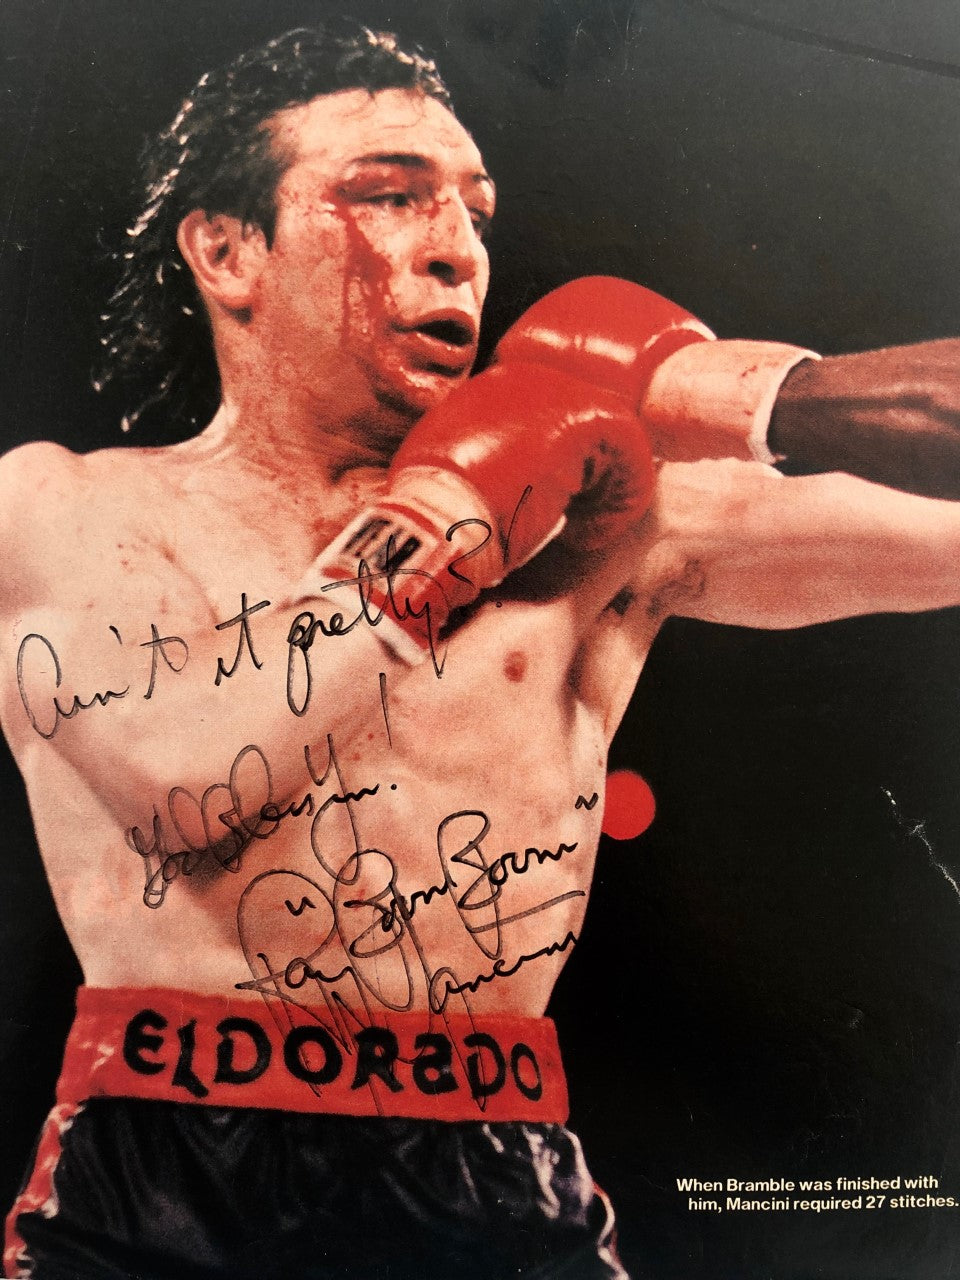 Ray Boom Boom Mancini - Autographed Inscribed Photograph